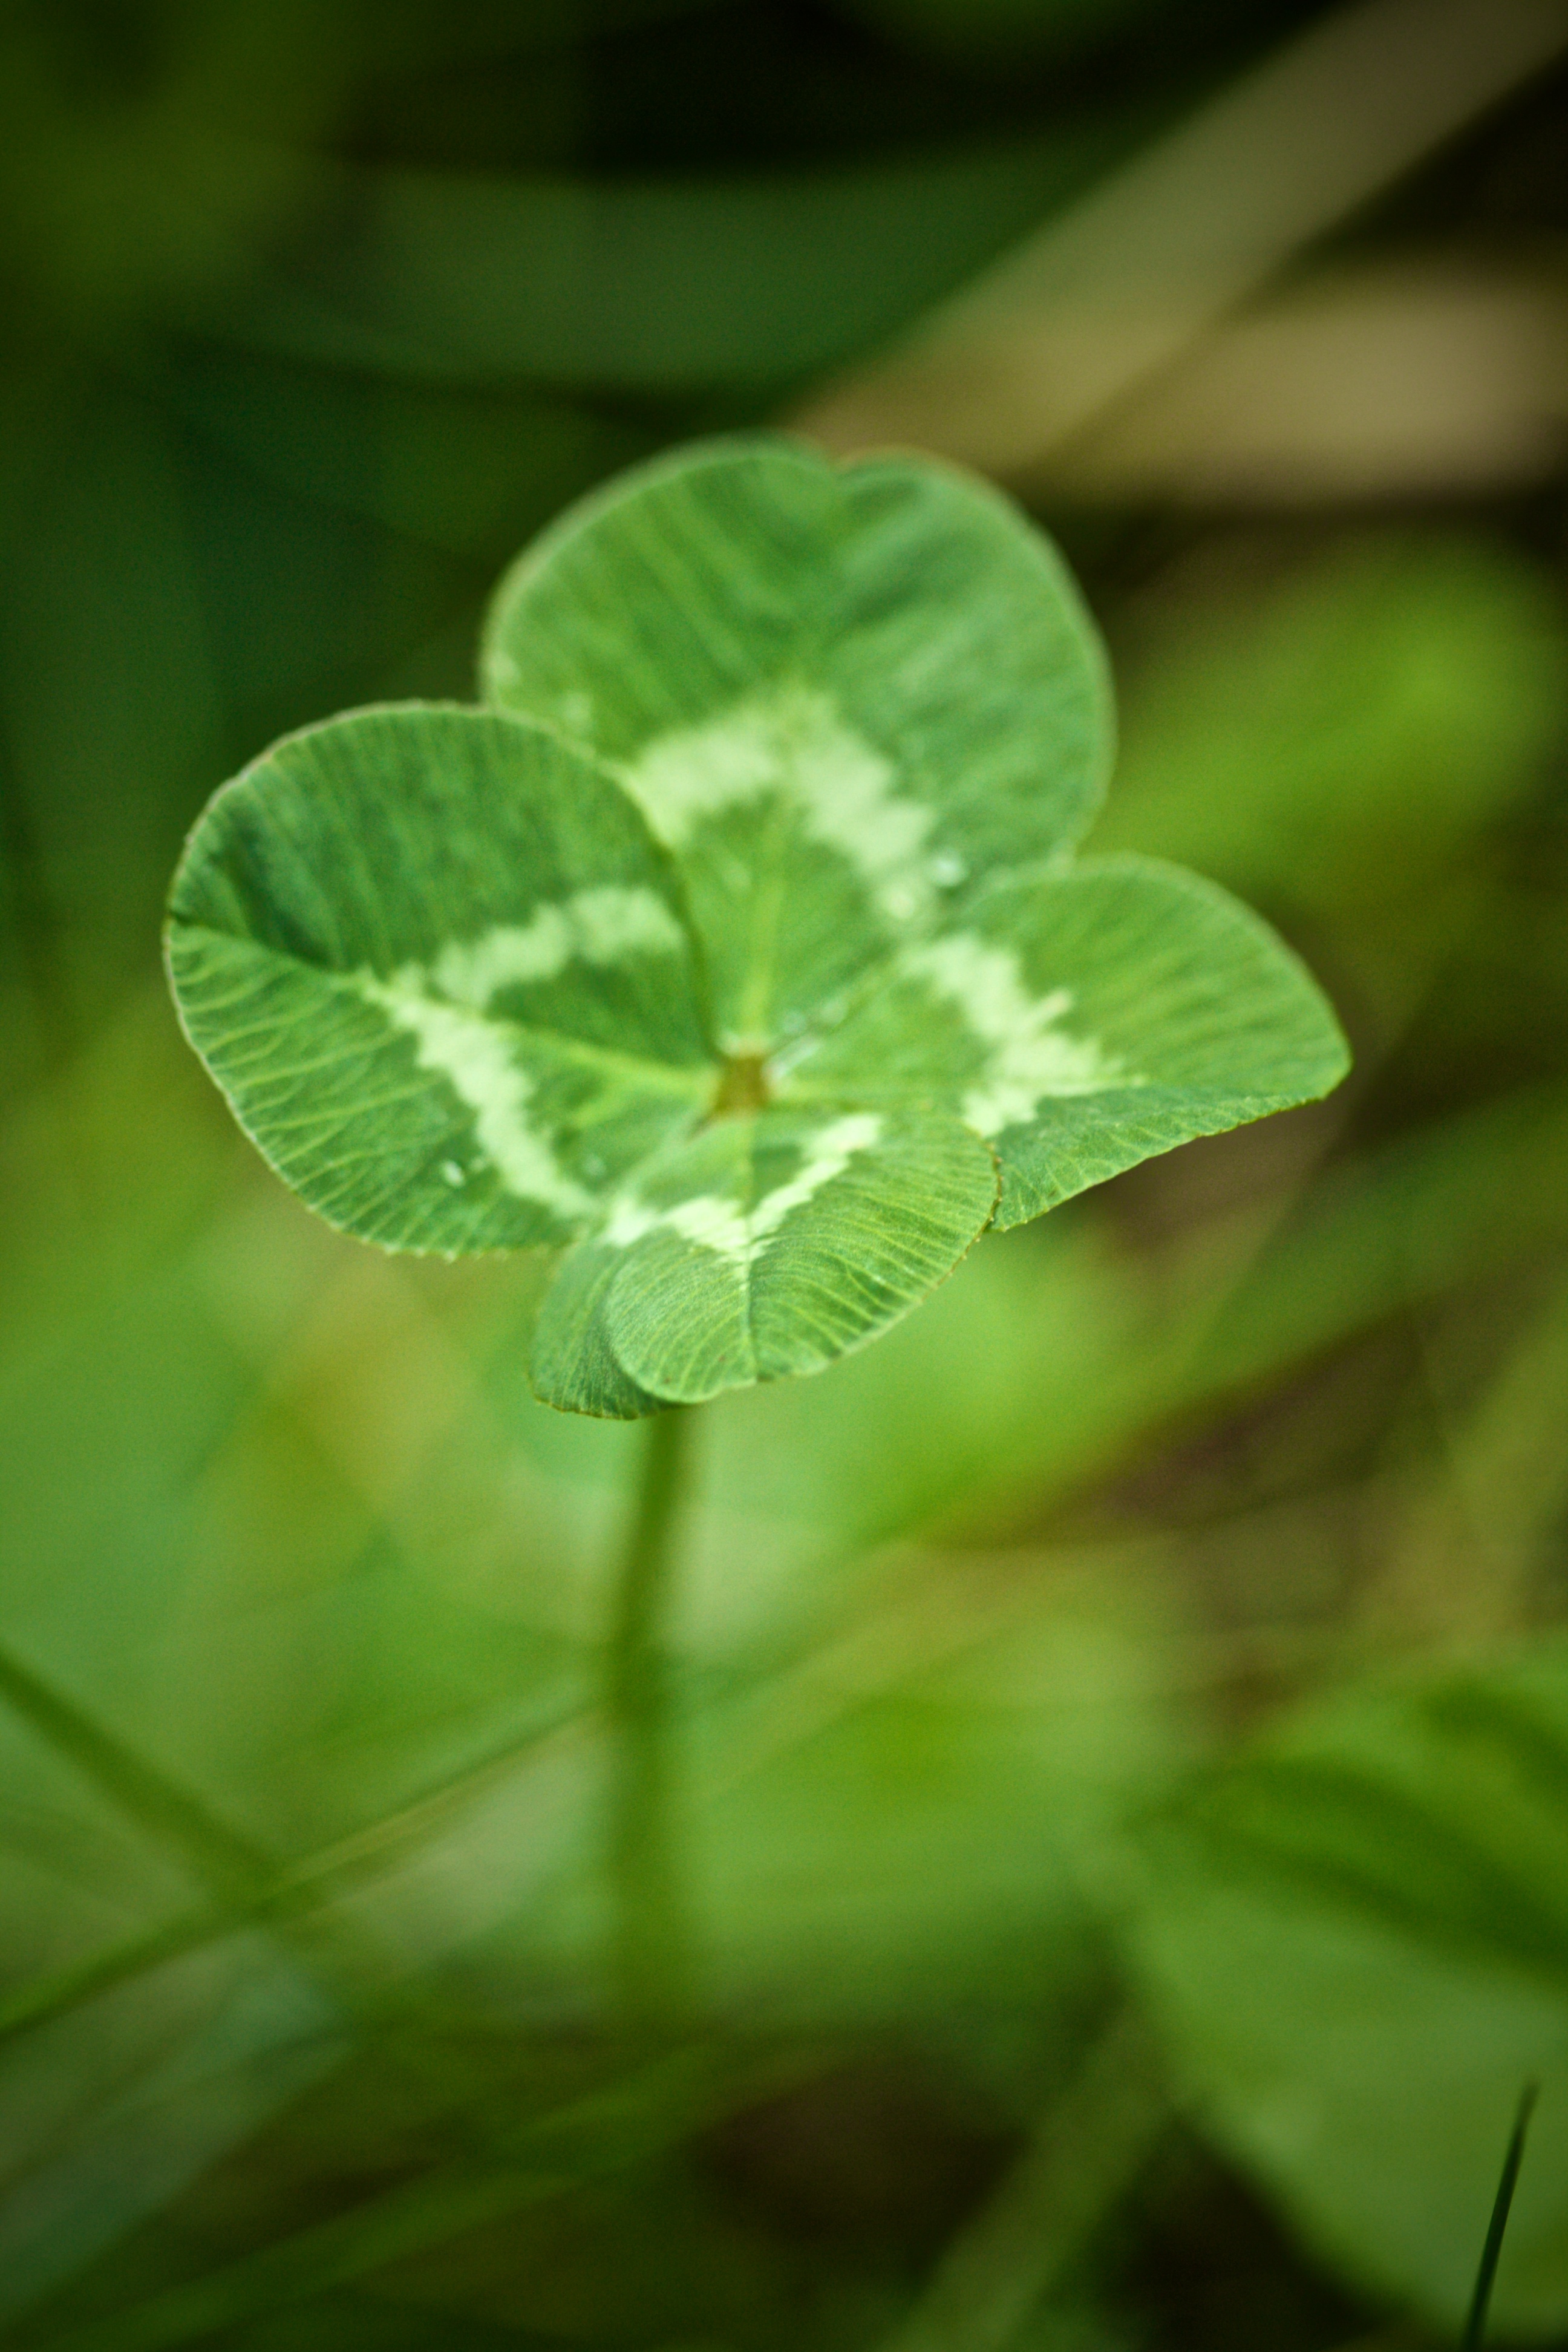 90046 download wallpaper leaves, green, macro, clover screensavers and pictures for free